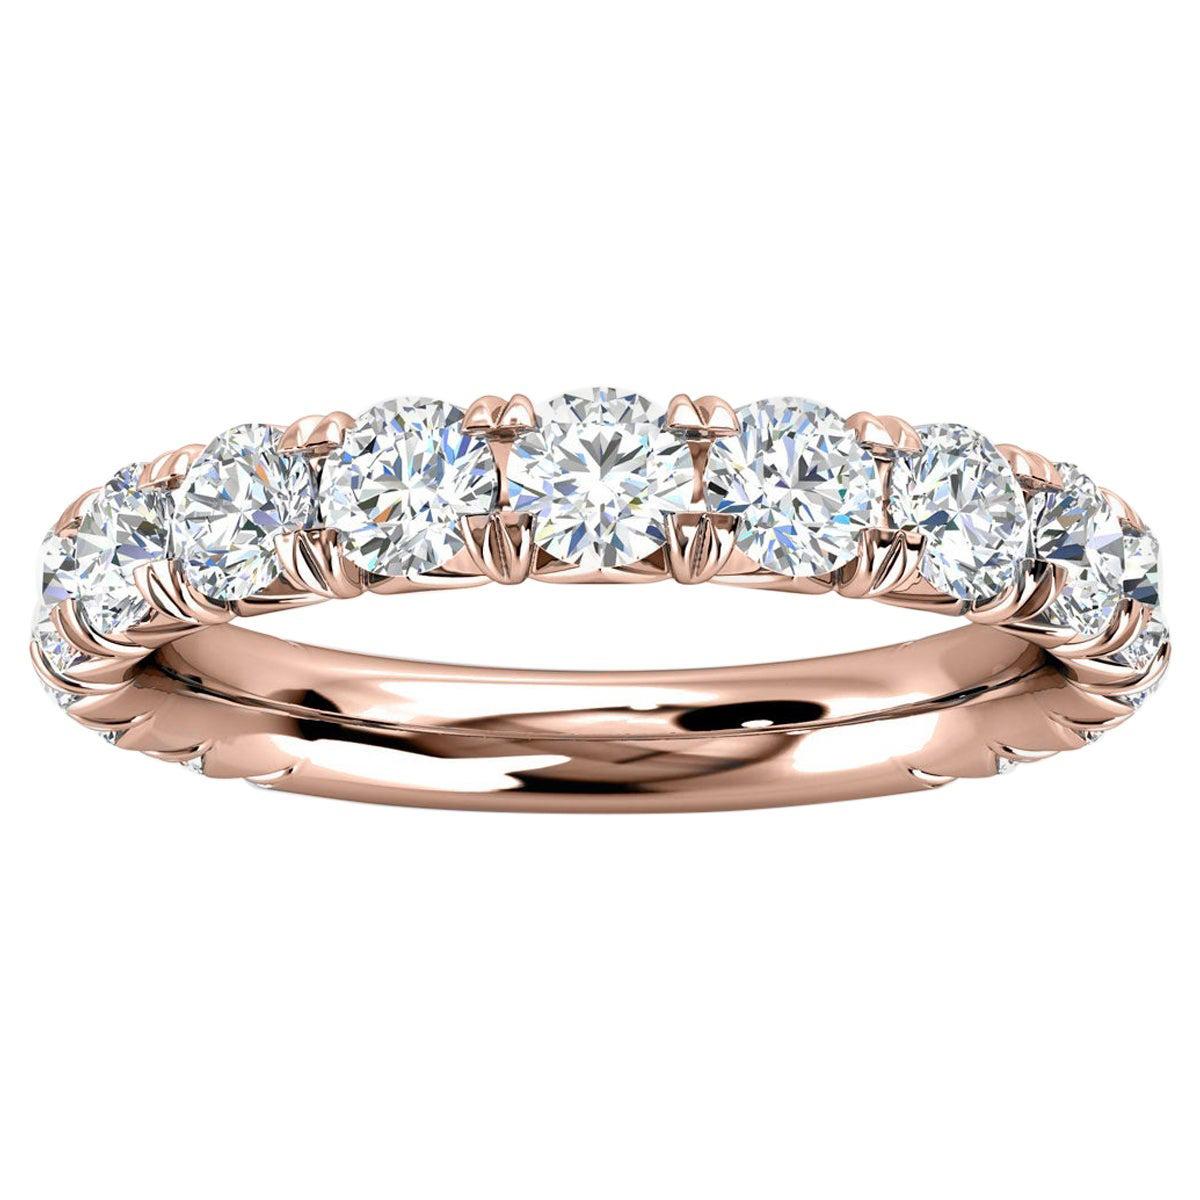 For Sale:  18k Rose Gold GIA French Pave Diamond Ring '1 1/2 Ct. Tw'